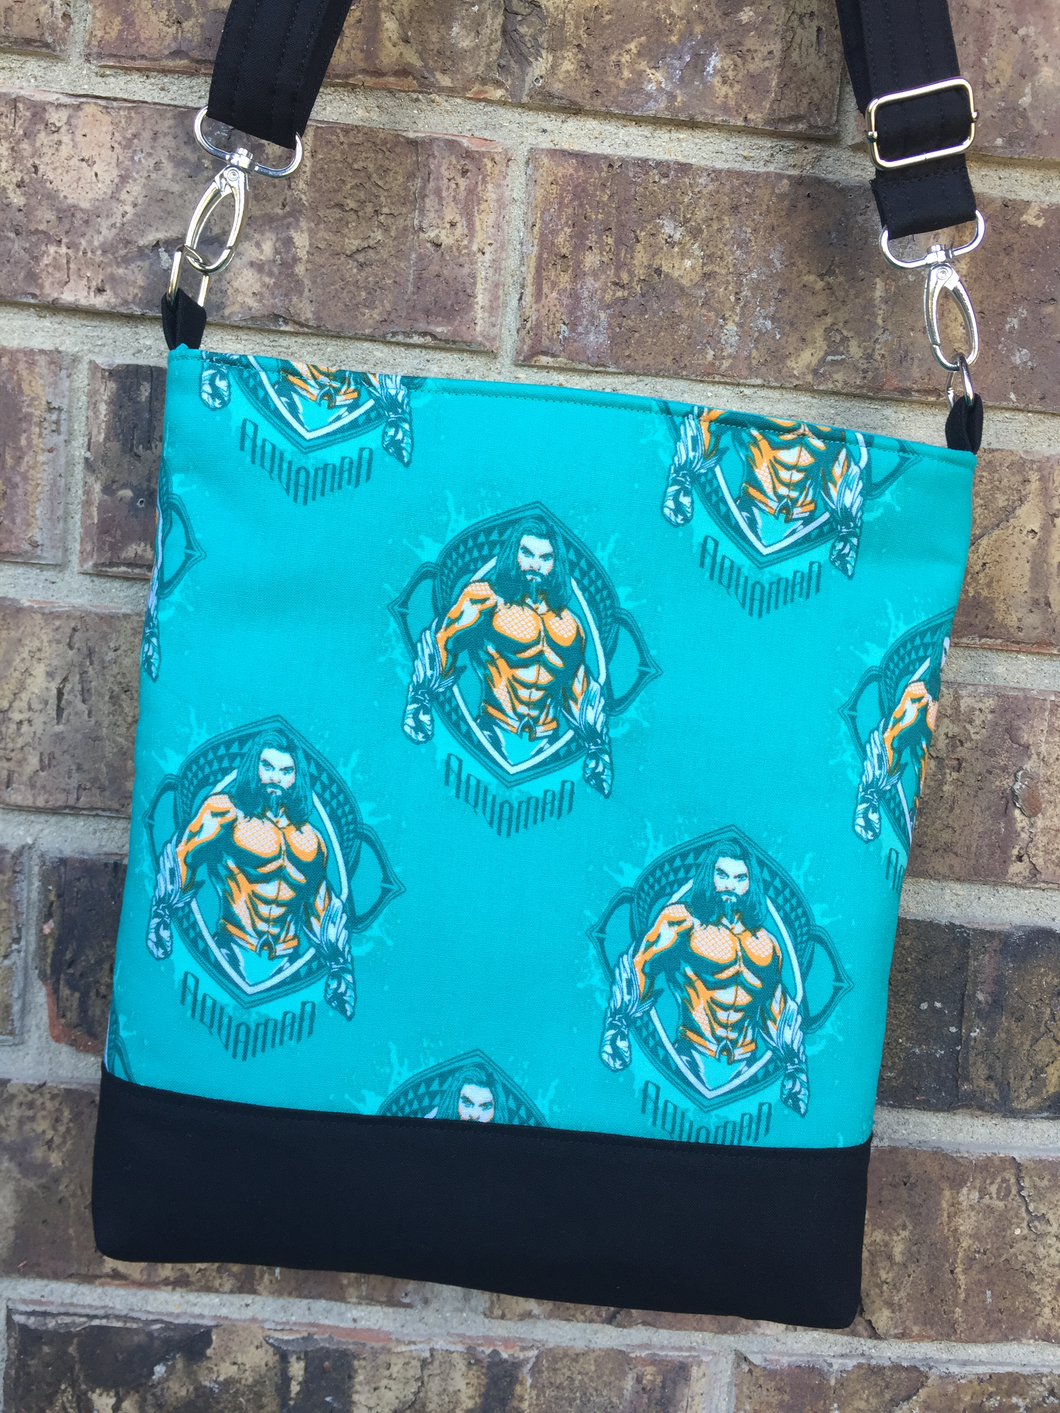 Messenger Bag Made With Licensed Water Guy Fabric - Adjustable Strap - Zippered Closure - Zippered Pocket - Cross Body Bag